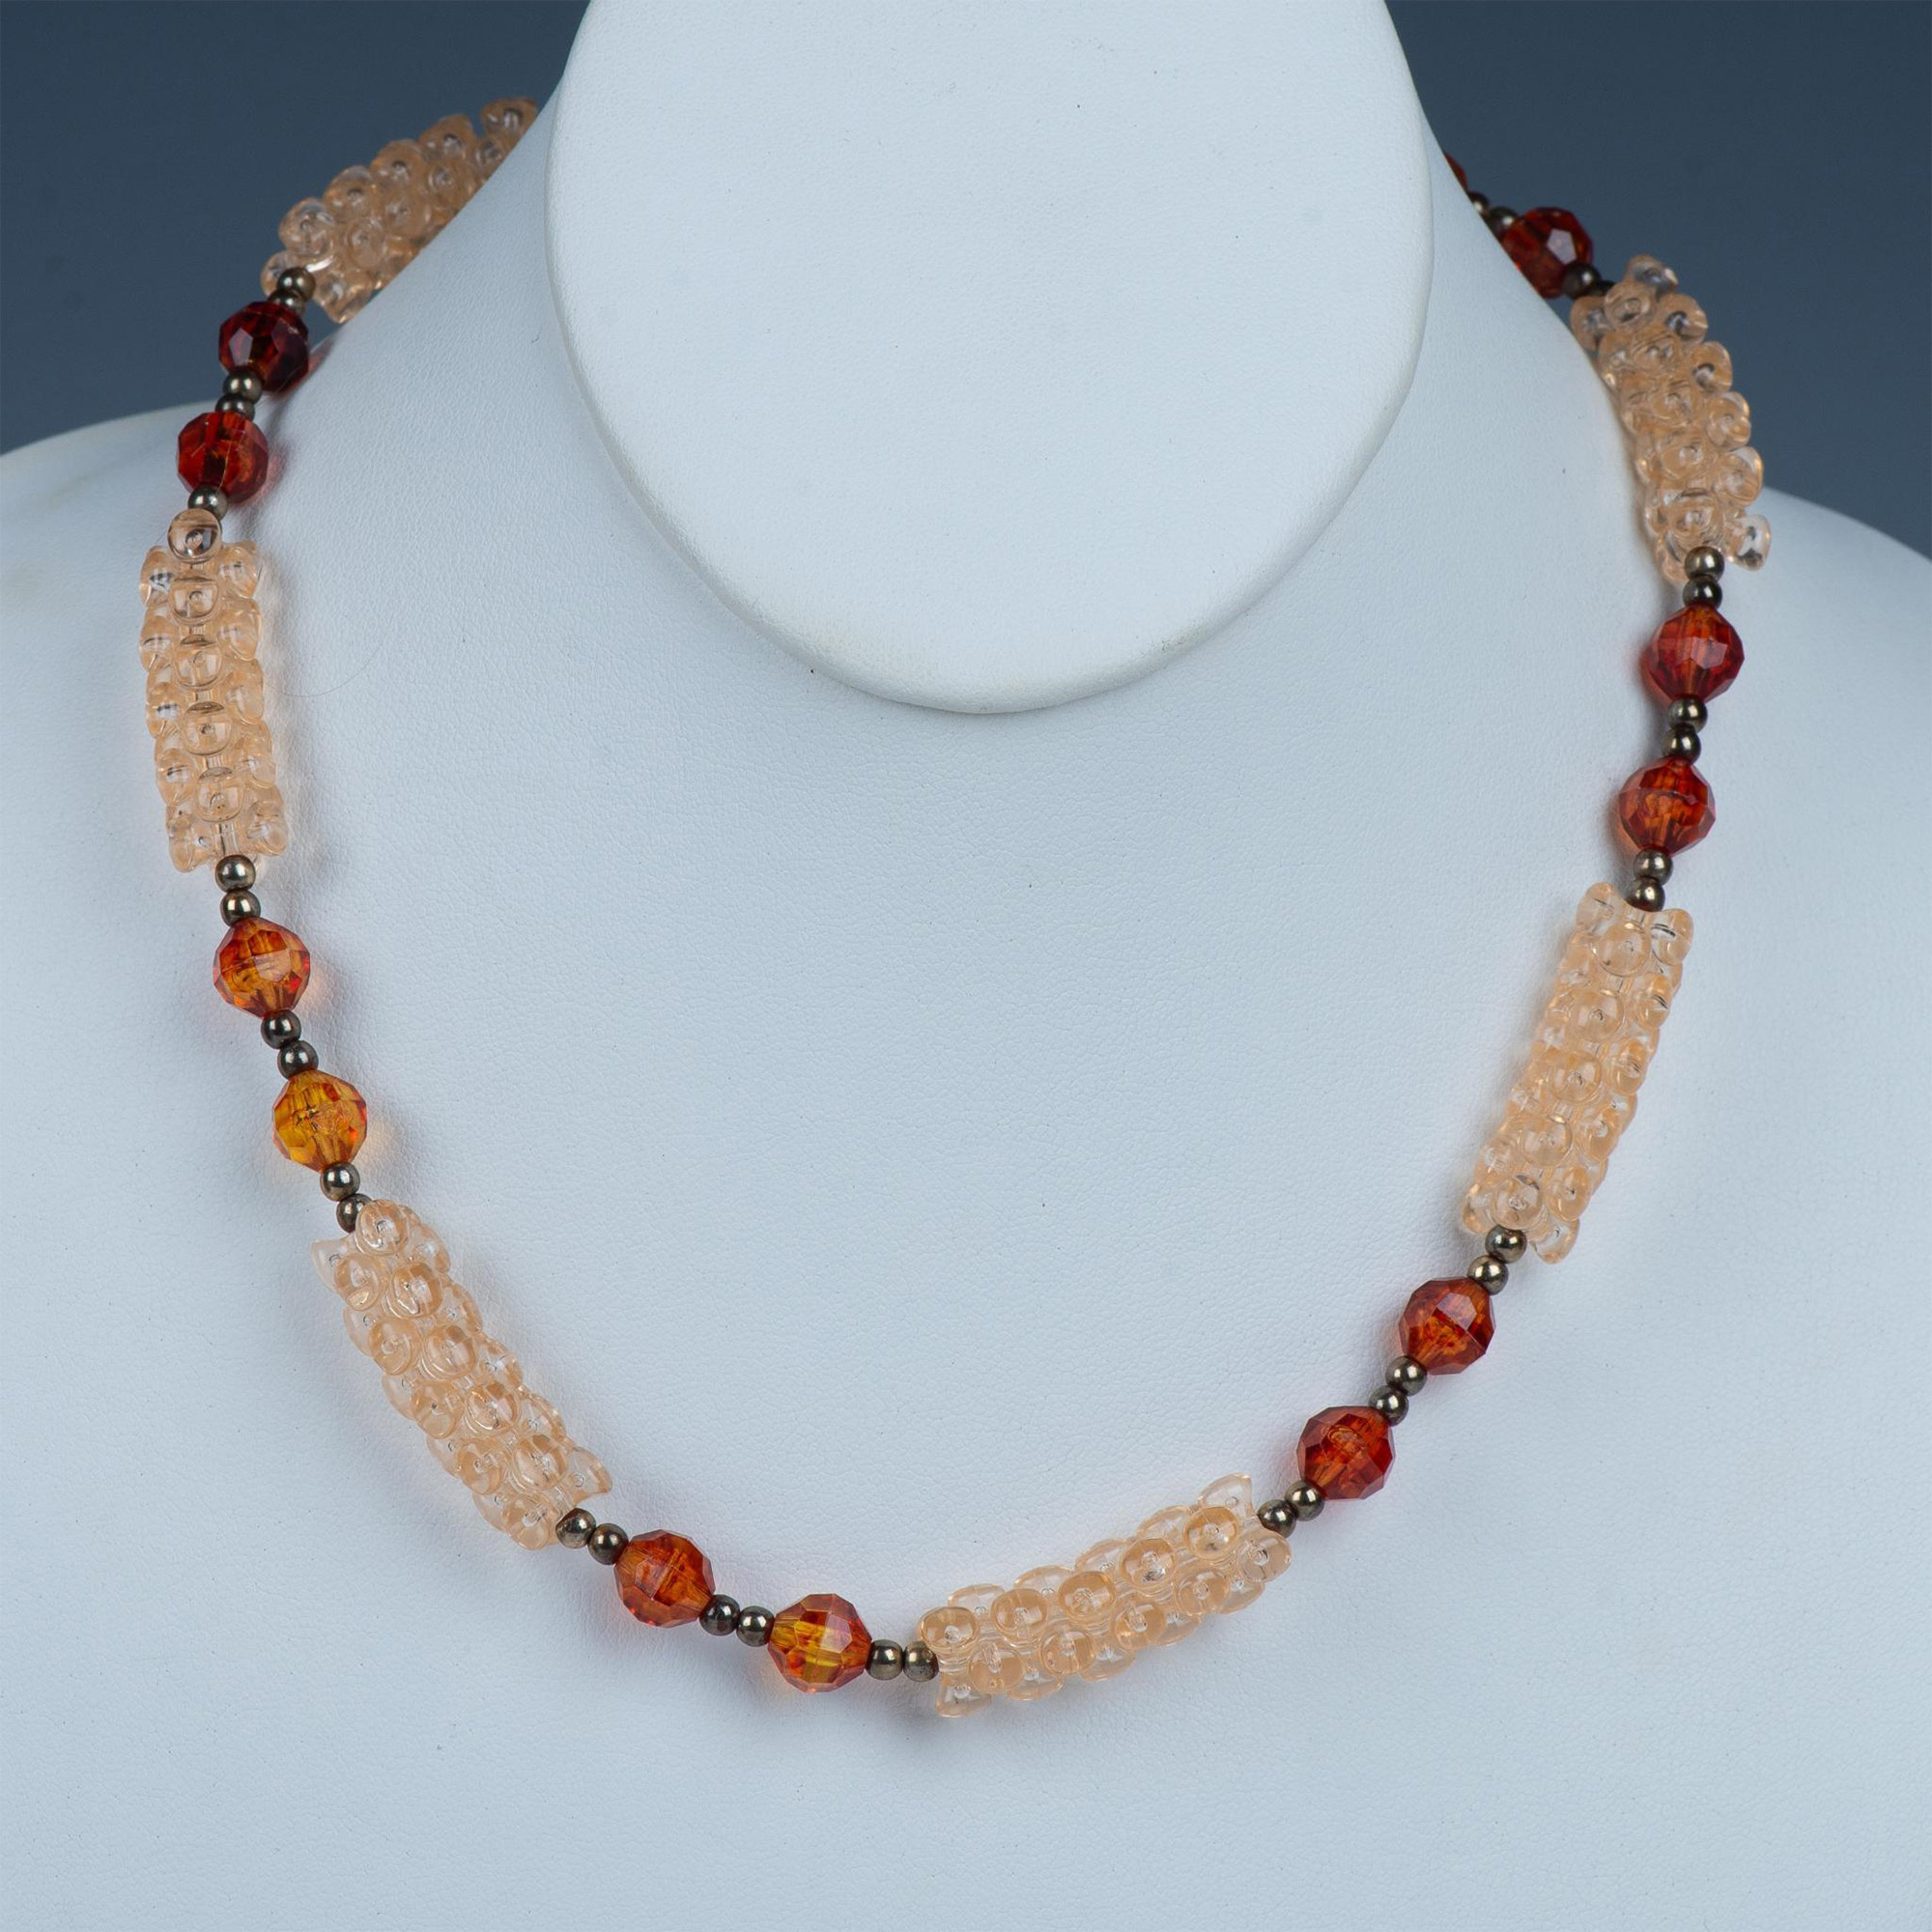 Cute Peach and Amber Colored Bead Necklace